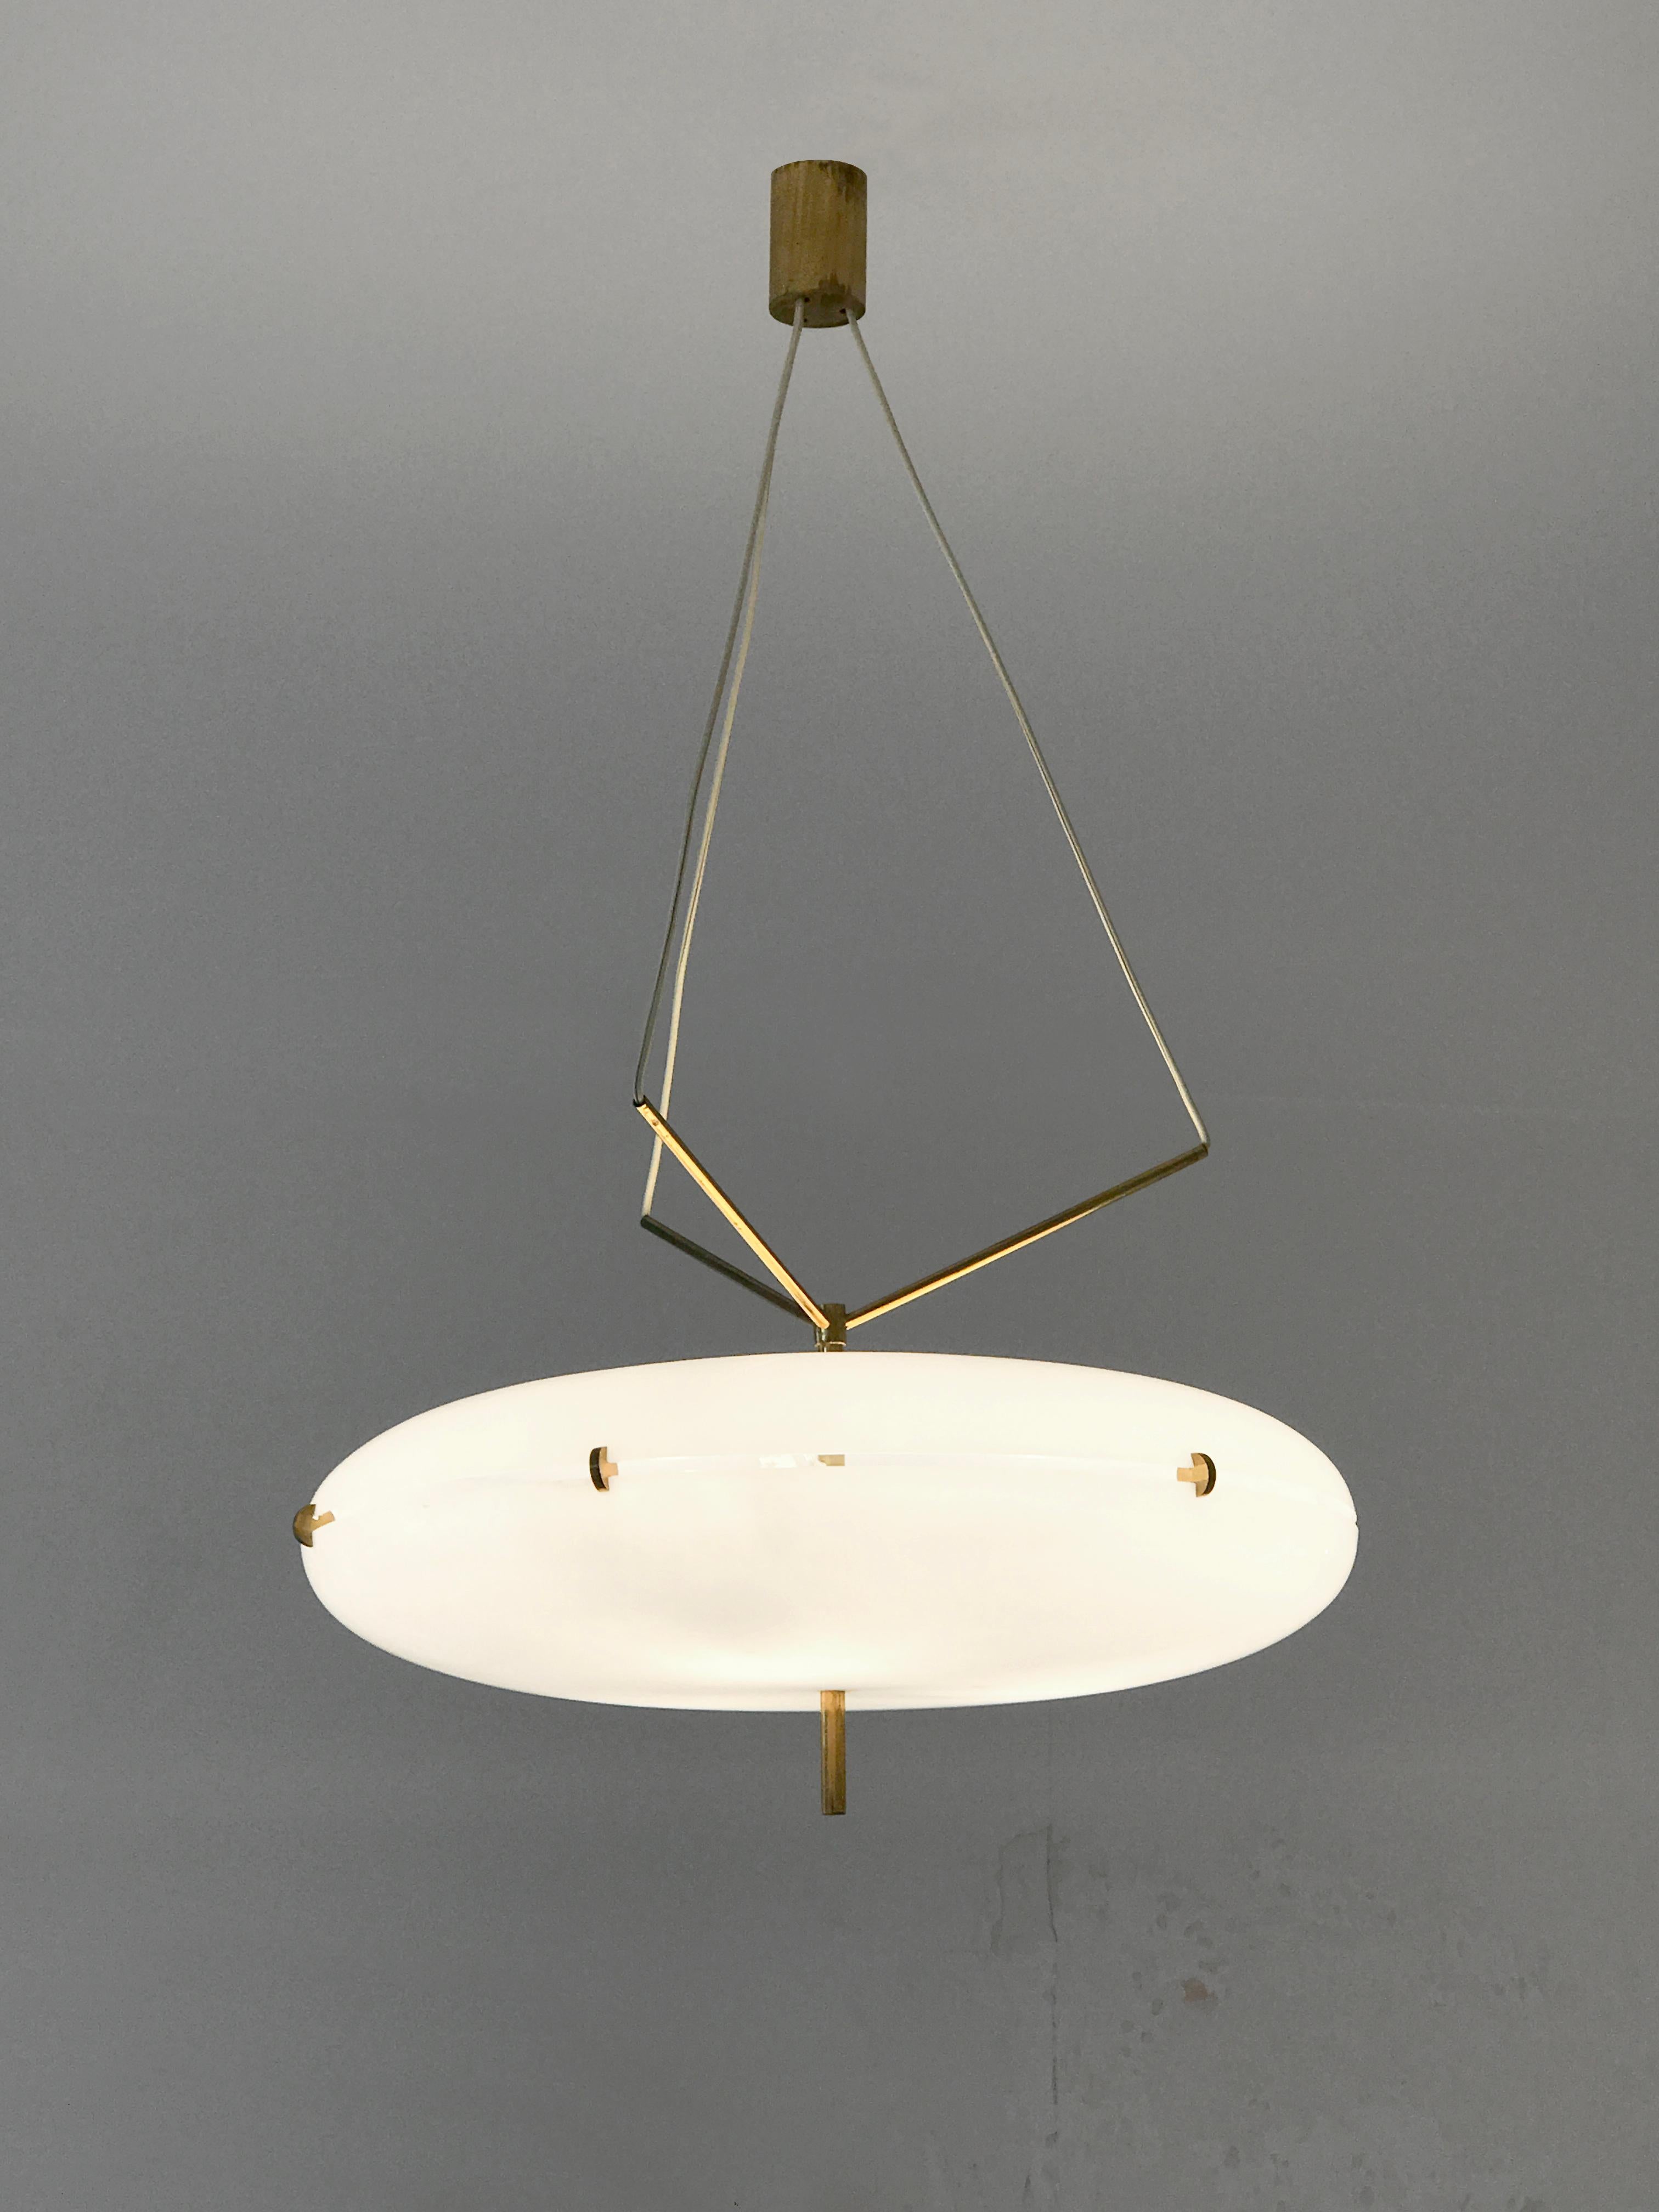 A MID-CENTURY-MODERN MODERNIST SPACE-AGE Ceiling Light by STILNOVO, Italy 1960  For Sale 3